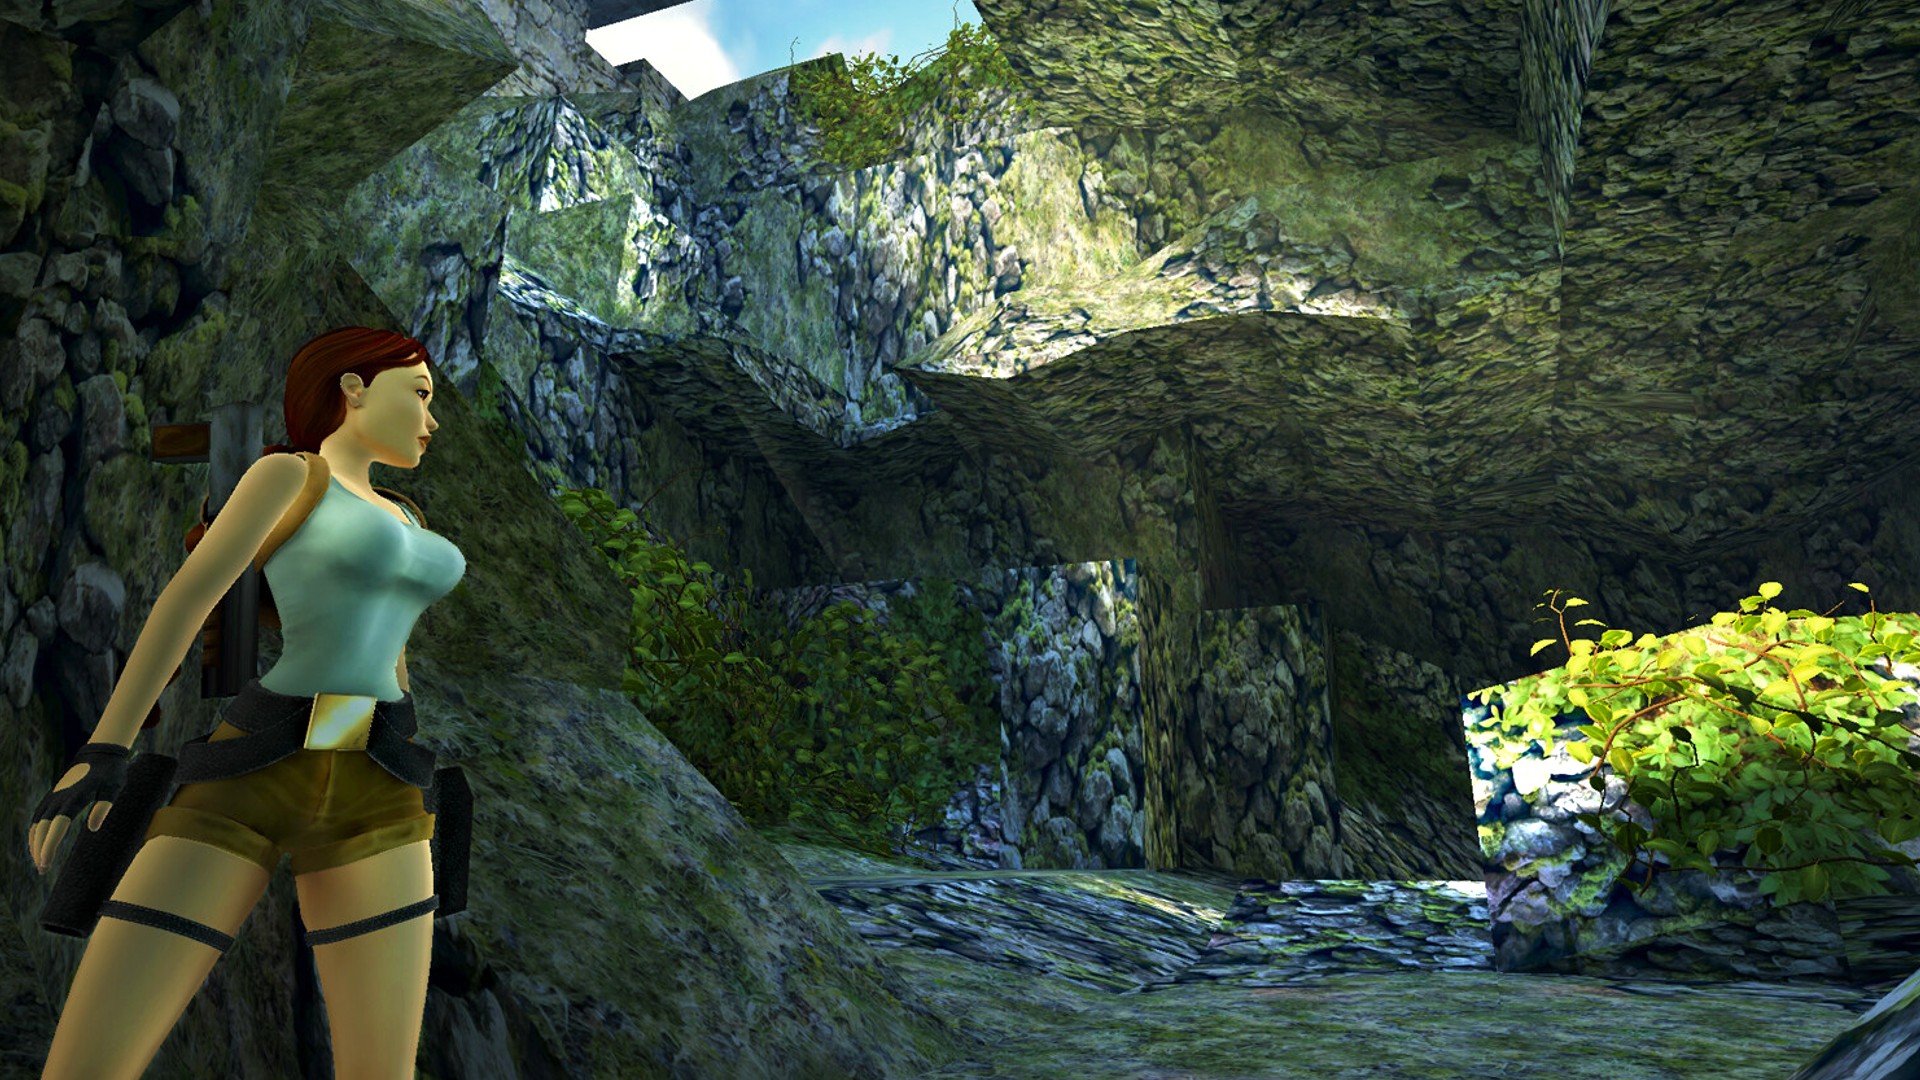 Lara Croft looks into a mossy cave in Tomb Raider I-III Remastered.